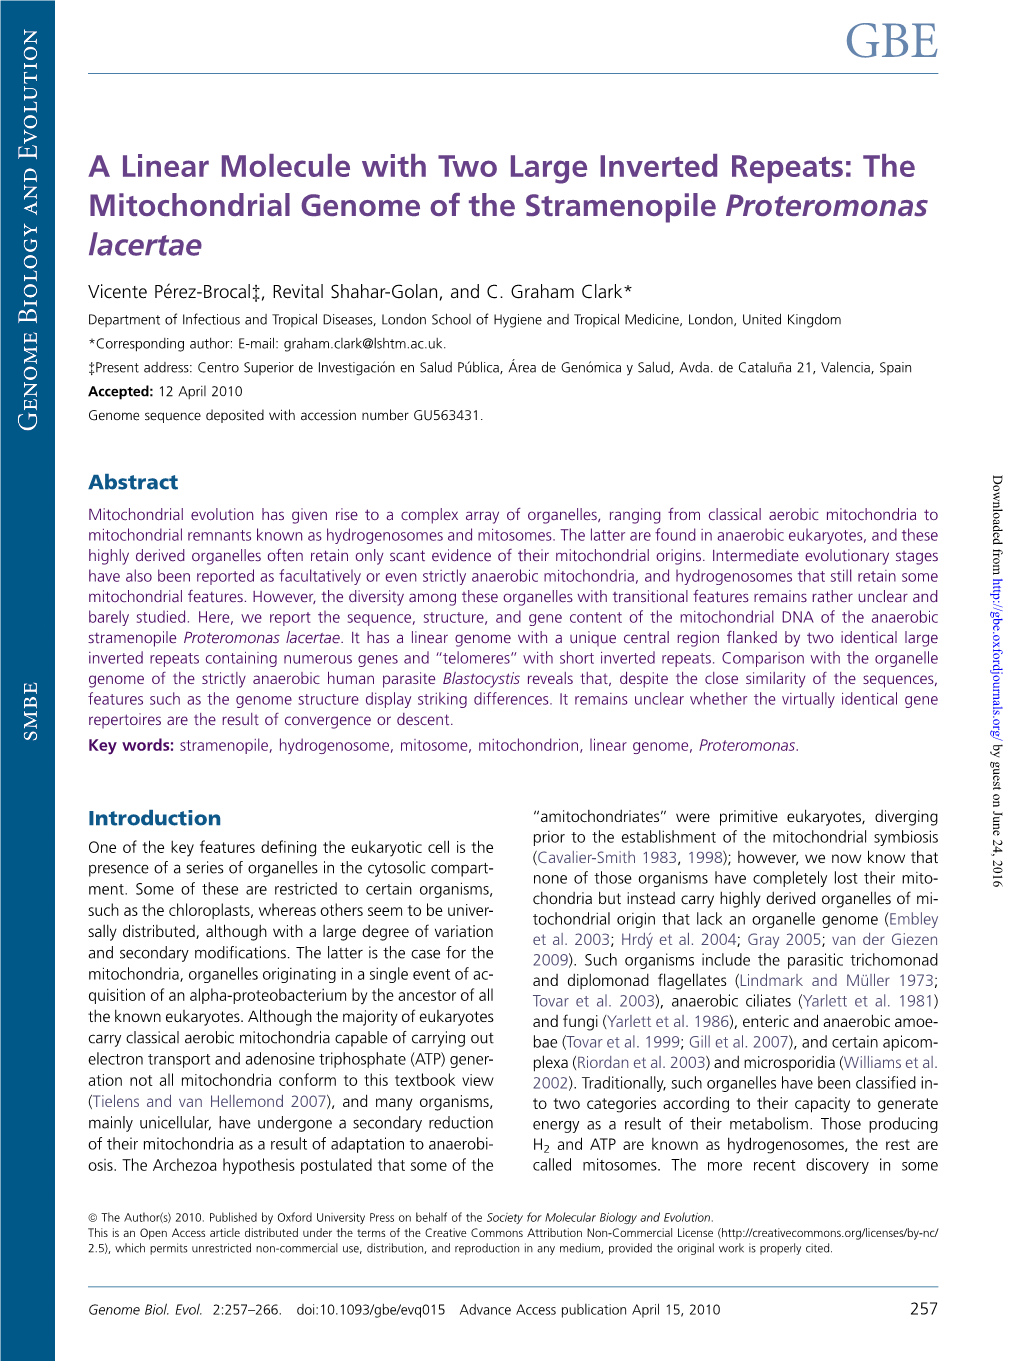 The Mitochondrial Genome of the Stramenopile Proteromonas Lacertae